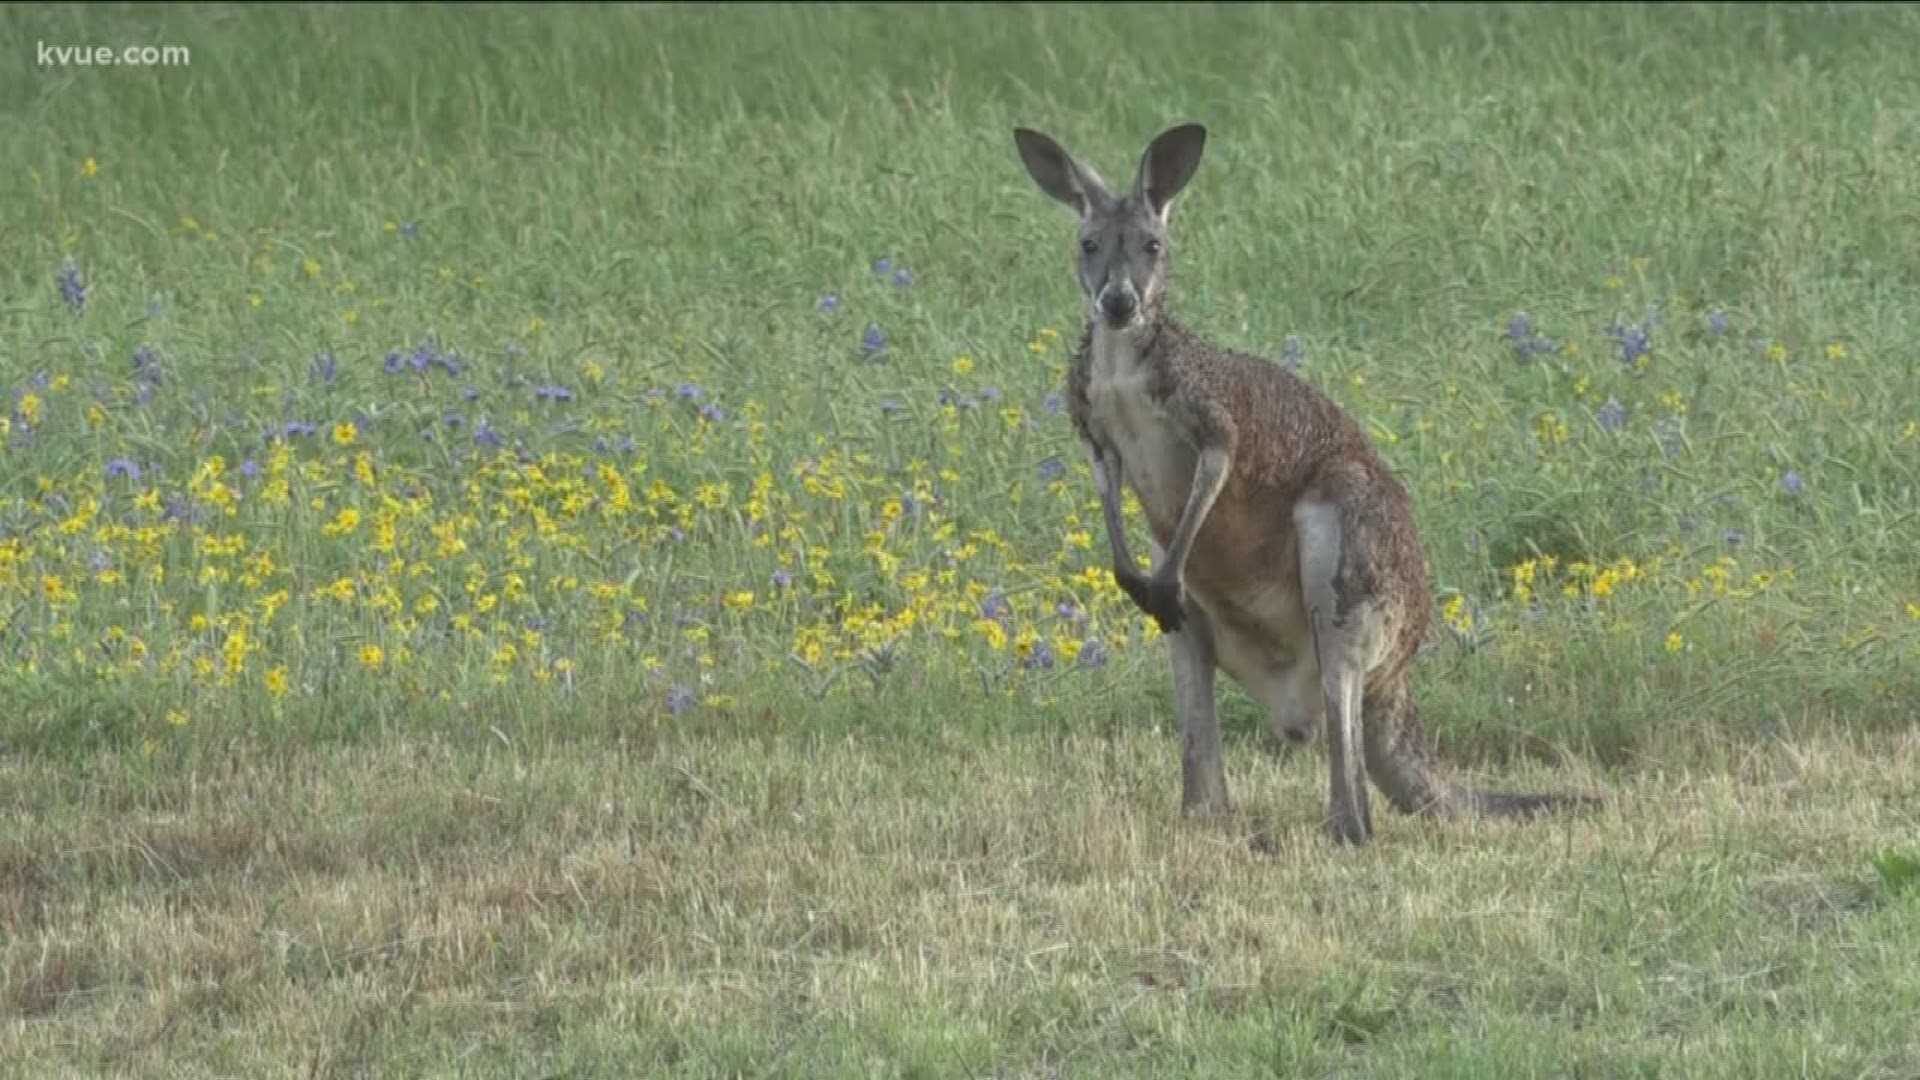 The Marsupial hopped out of his owner's ranch in San Marcos. KVUE's Jay Wallis tracked it down and told us how it got loose in the first place.